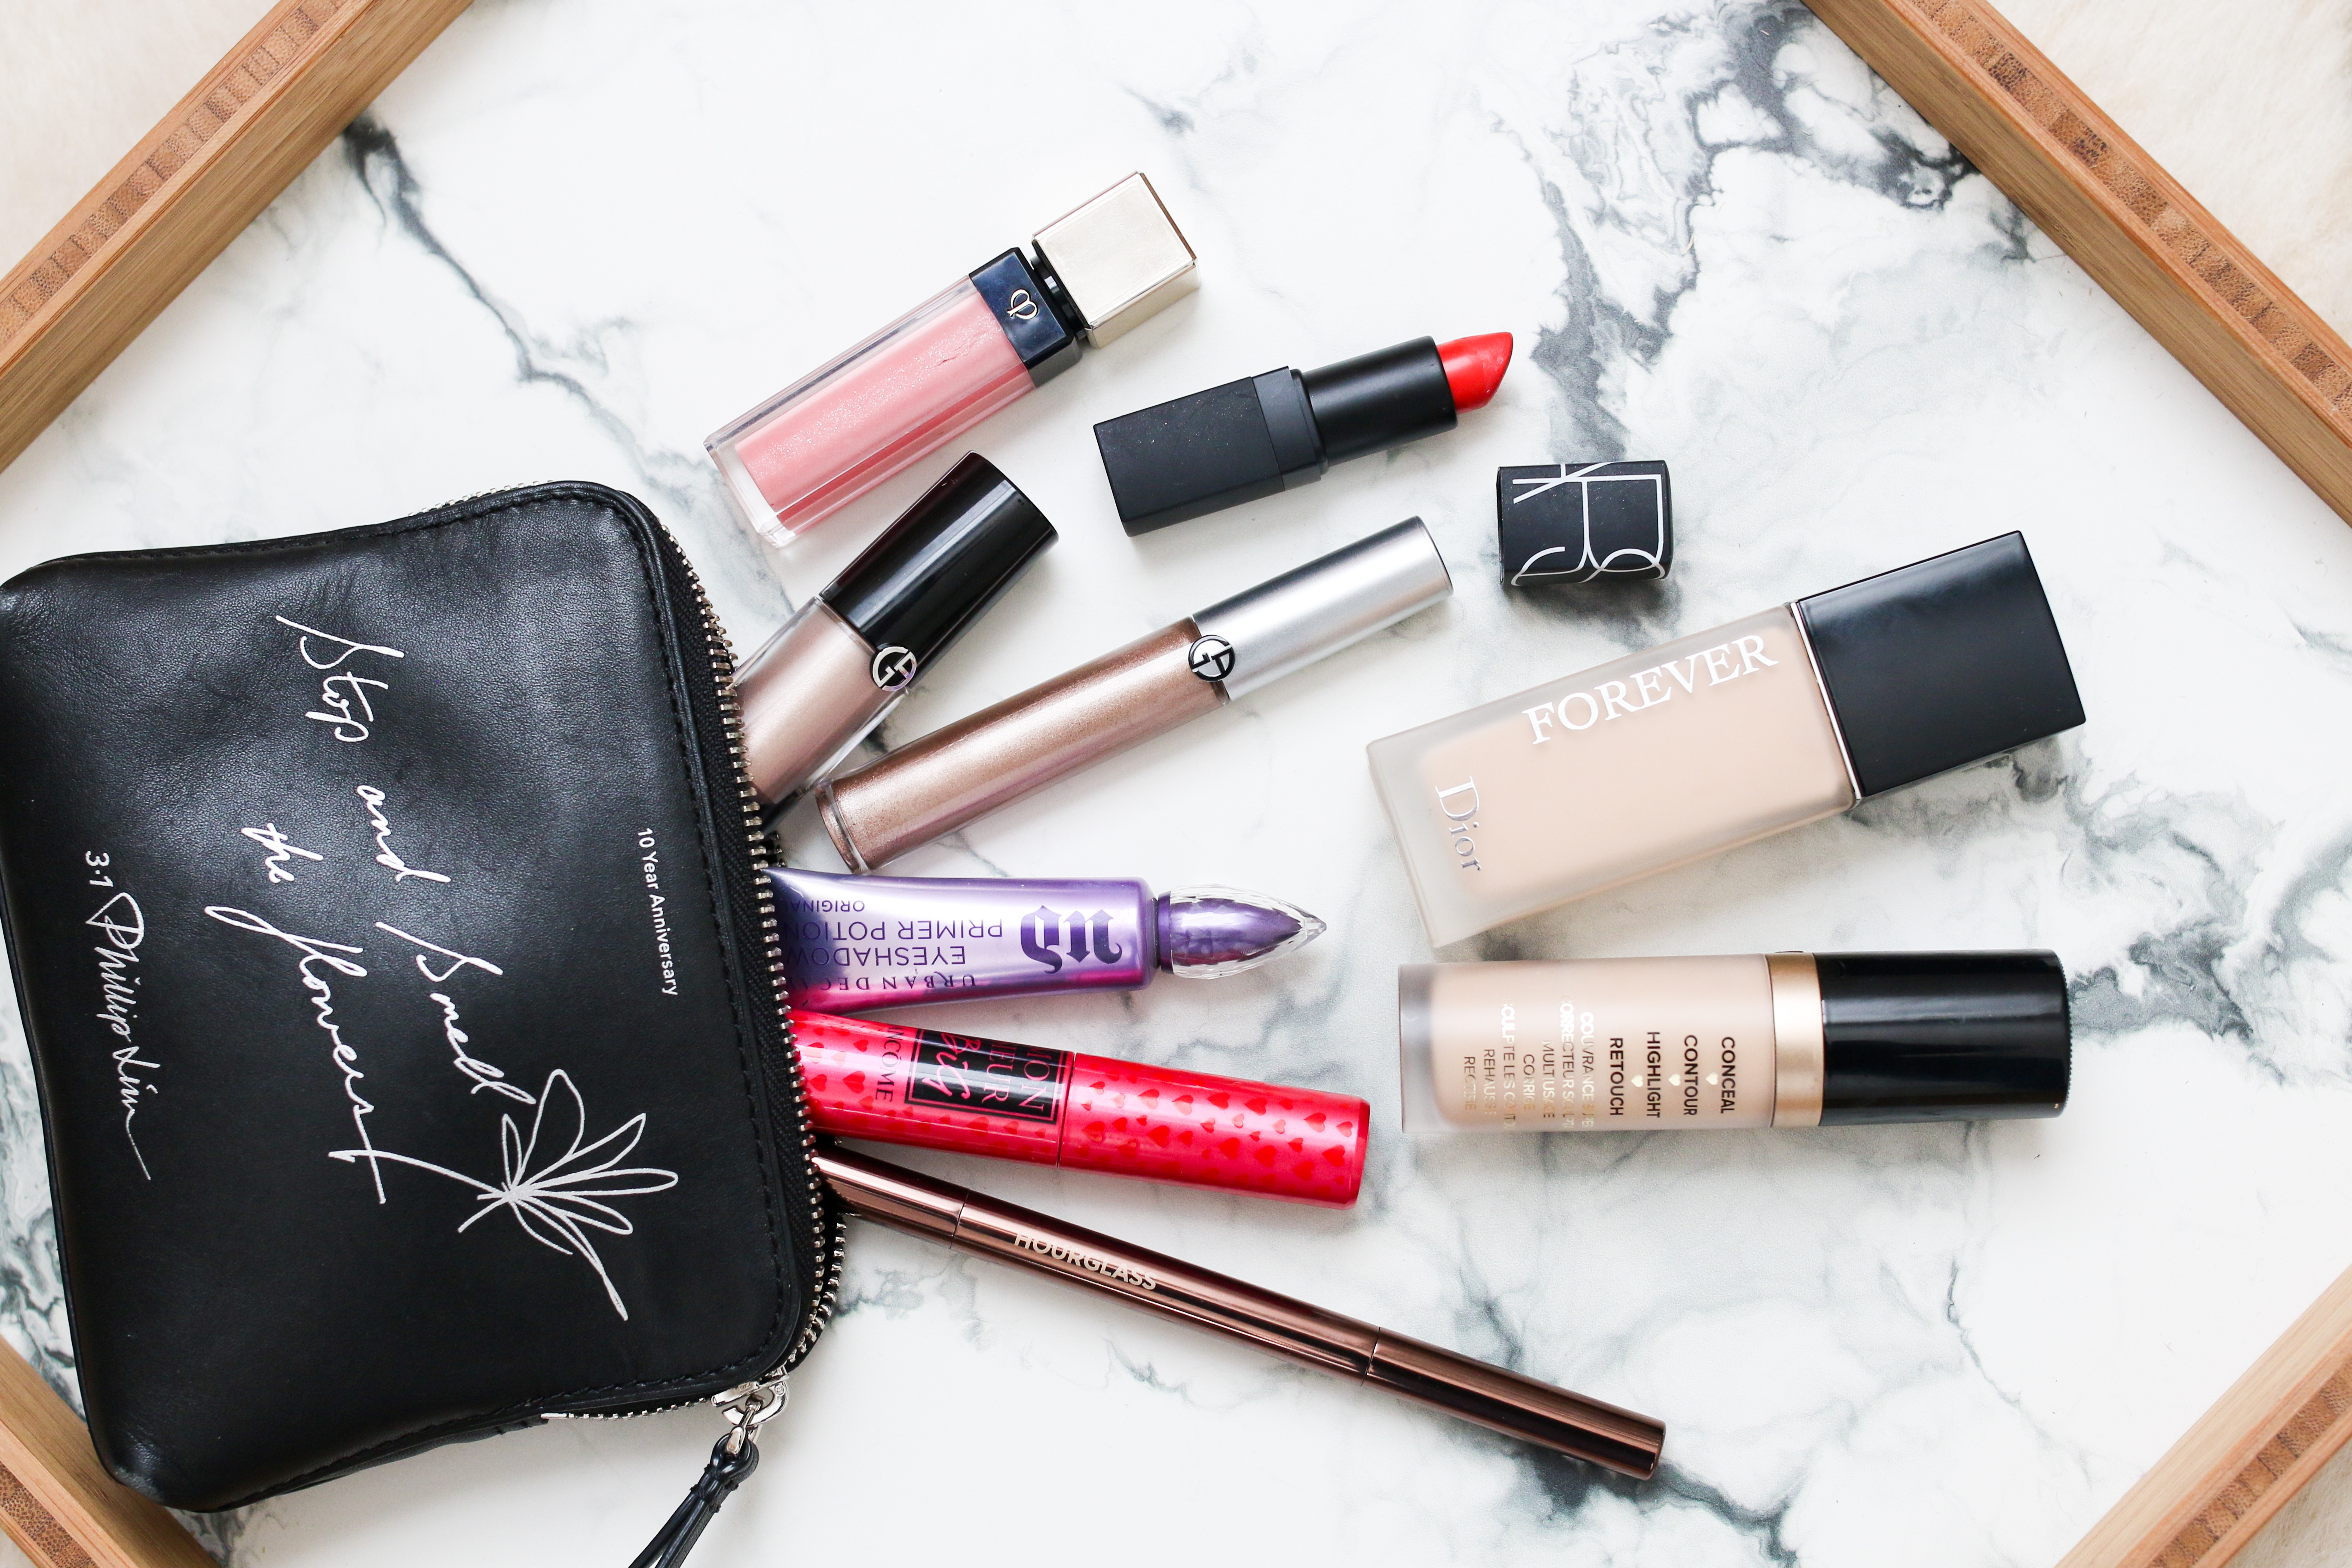 My 10 most repurchased makeup items - alittlebitetc